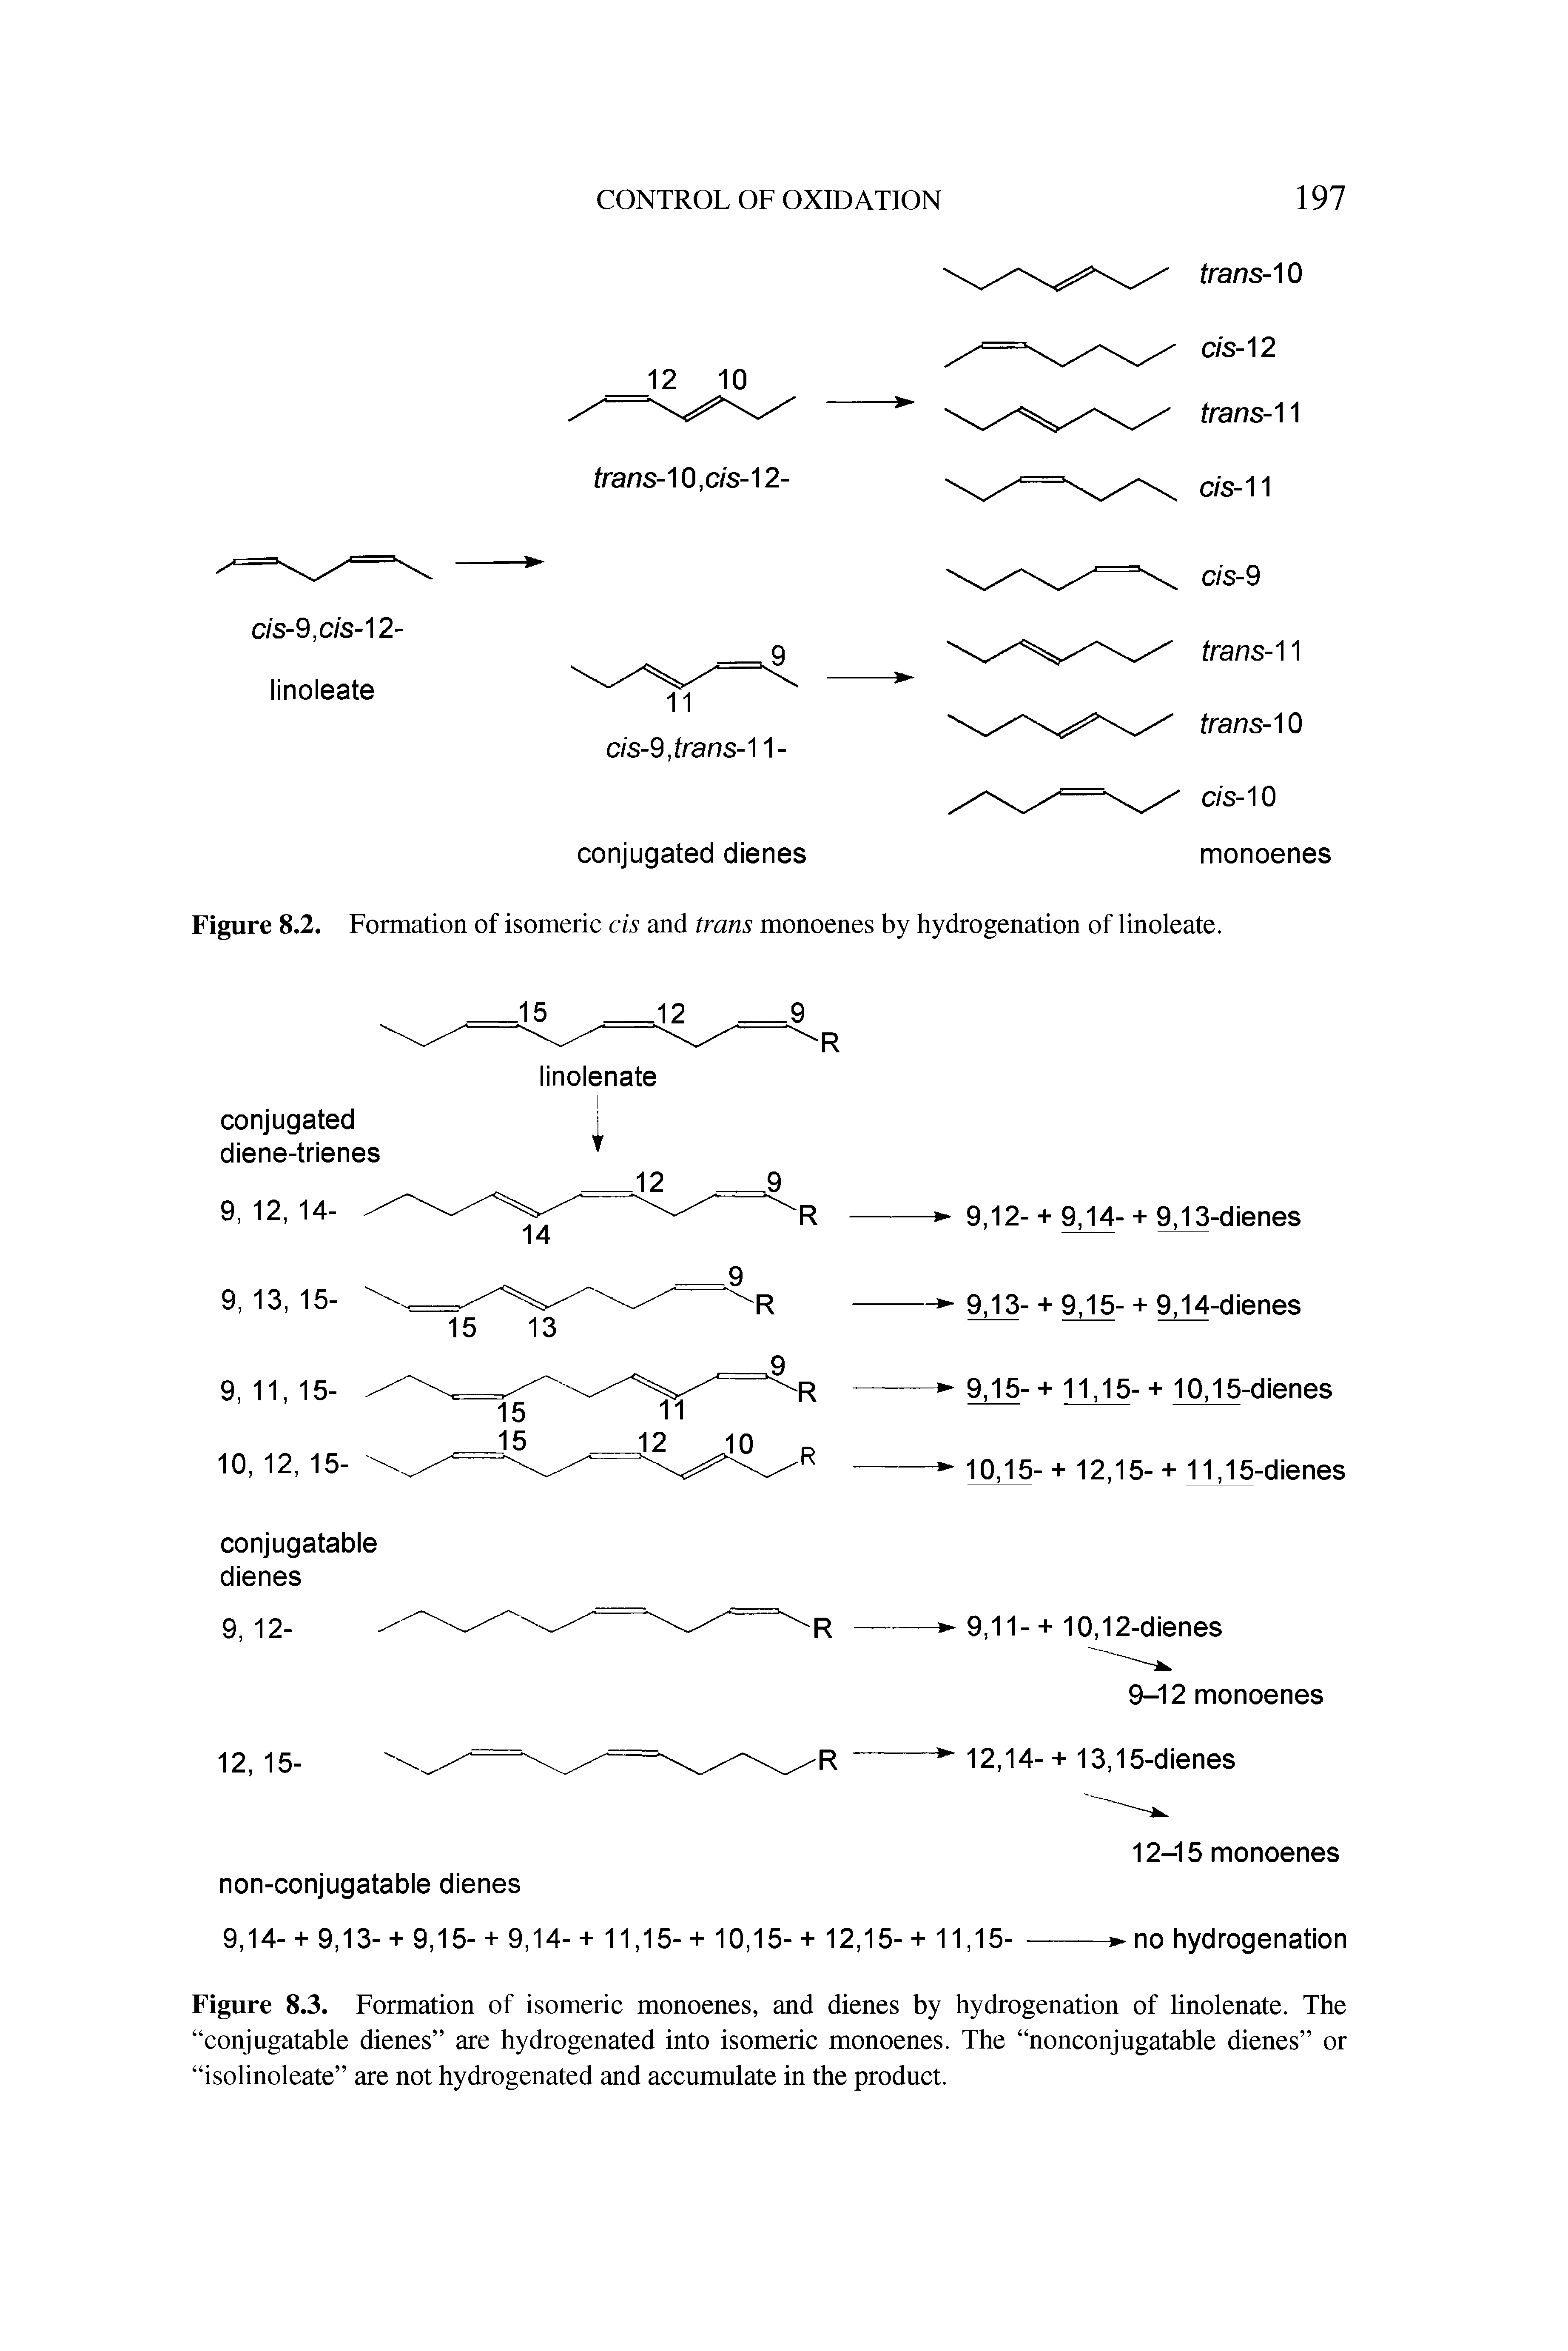 Figure 8.3. Formation of isomeric monoenes, and dienes by hydrogenation of linolenate. The conjugatable dienes are hydrogenated into isomeric monoenes. The nonconjugatable dienes or isolinoleate are not hydrogenated and accumulate in the product.